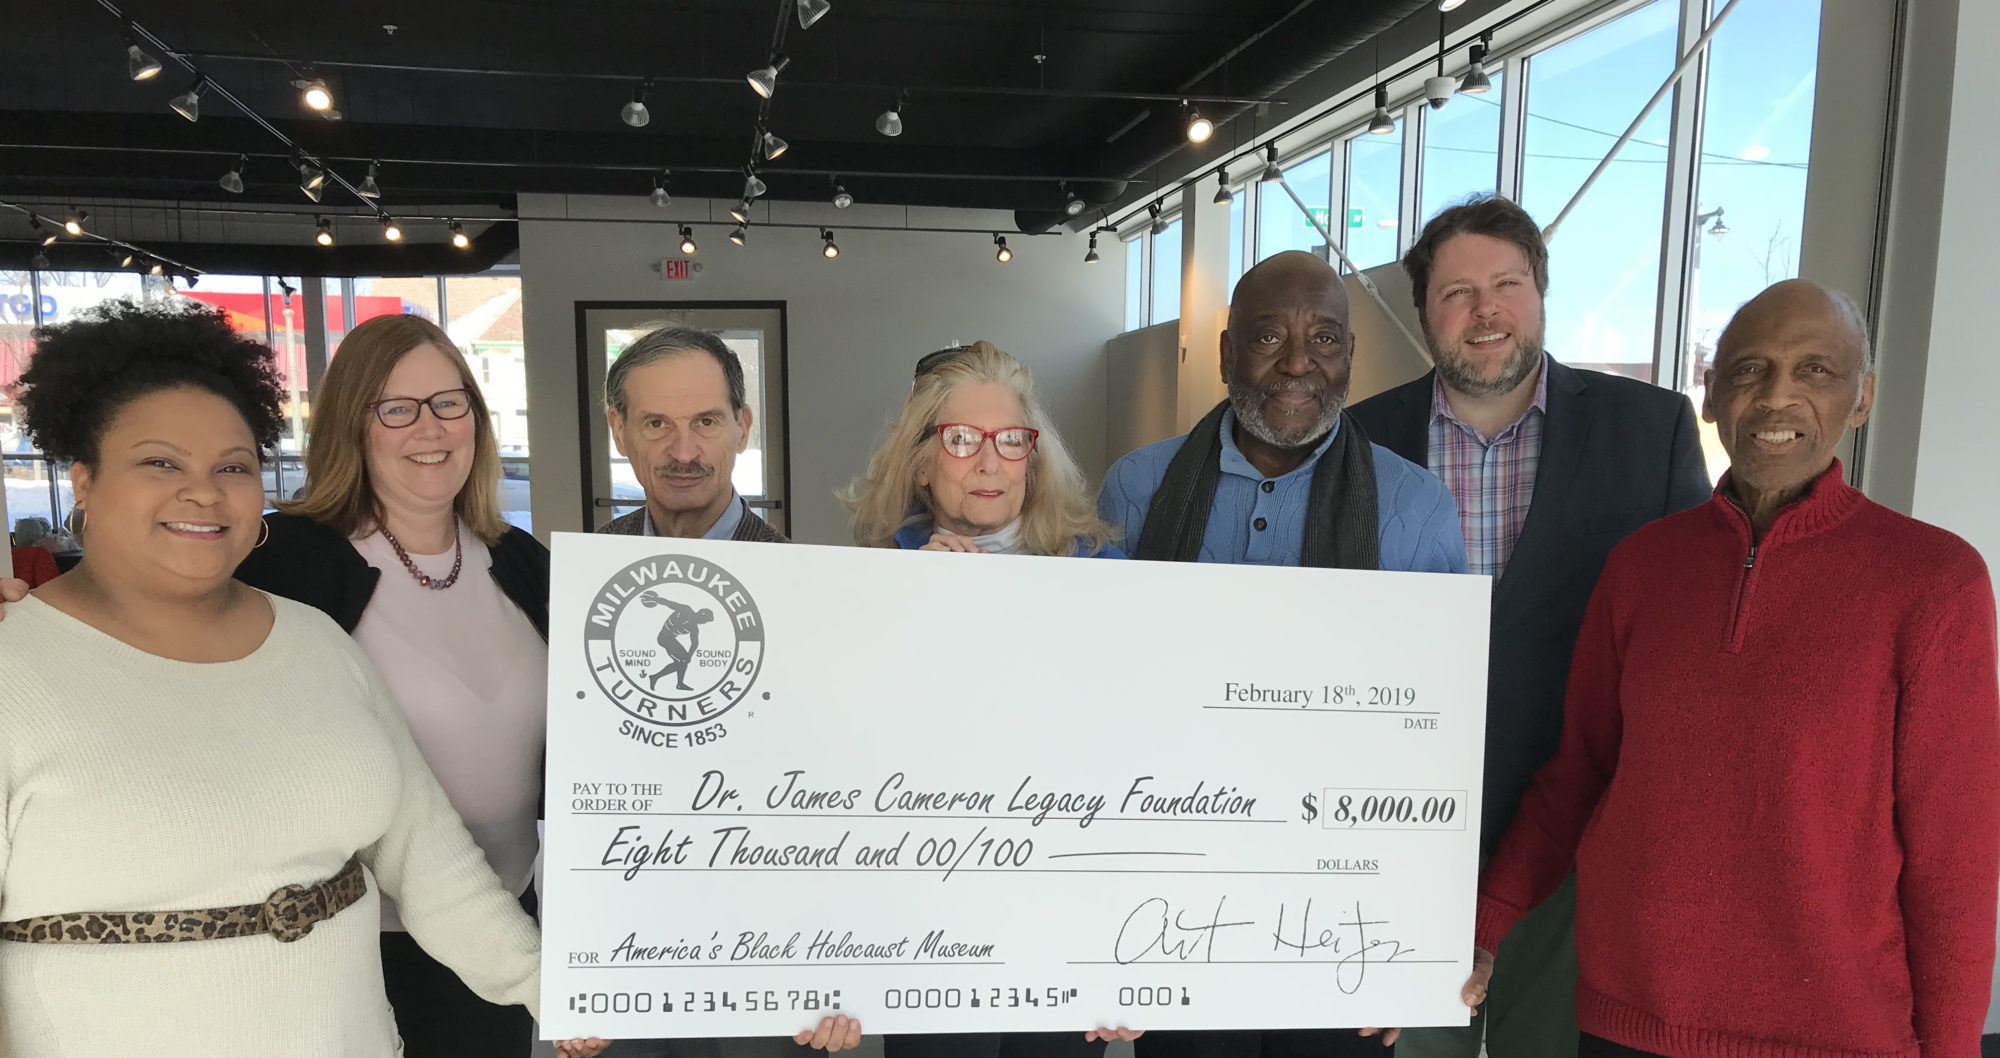 ABHM was thrilled to receive this very generous donation from the Milwaukee Turners, one of the oldest civic organizations in Milwaukee. L-R: Cydney Hargro, ABHM; Nancy Ketchman, ABHM; Art Heitzer, President of Milwaukee Turners, Patricia Obletz, Turner member; Virgil Cameron, son of Dr. Cameron and museum board member; Nicholas La Joie, Executive Director, Milwaukee Turners; and Reuben Harpole, museum board member.